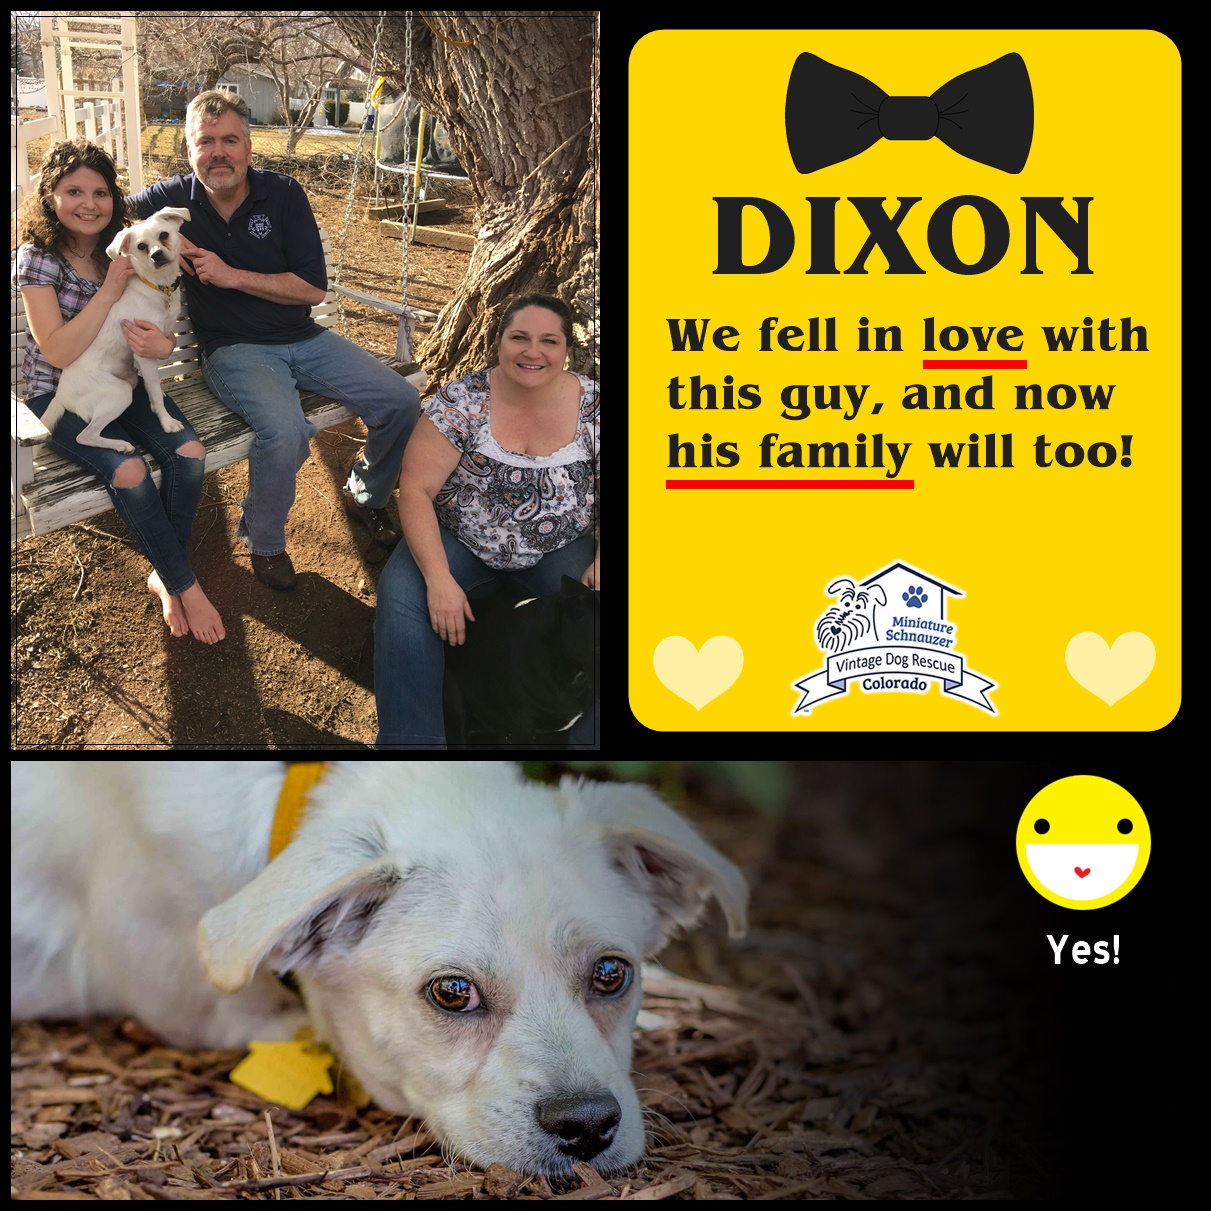 Dixon (Terrier Mix adopted)